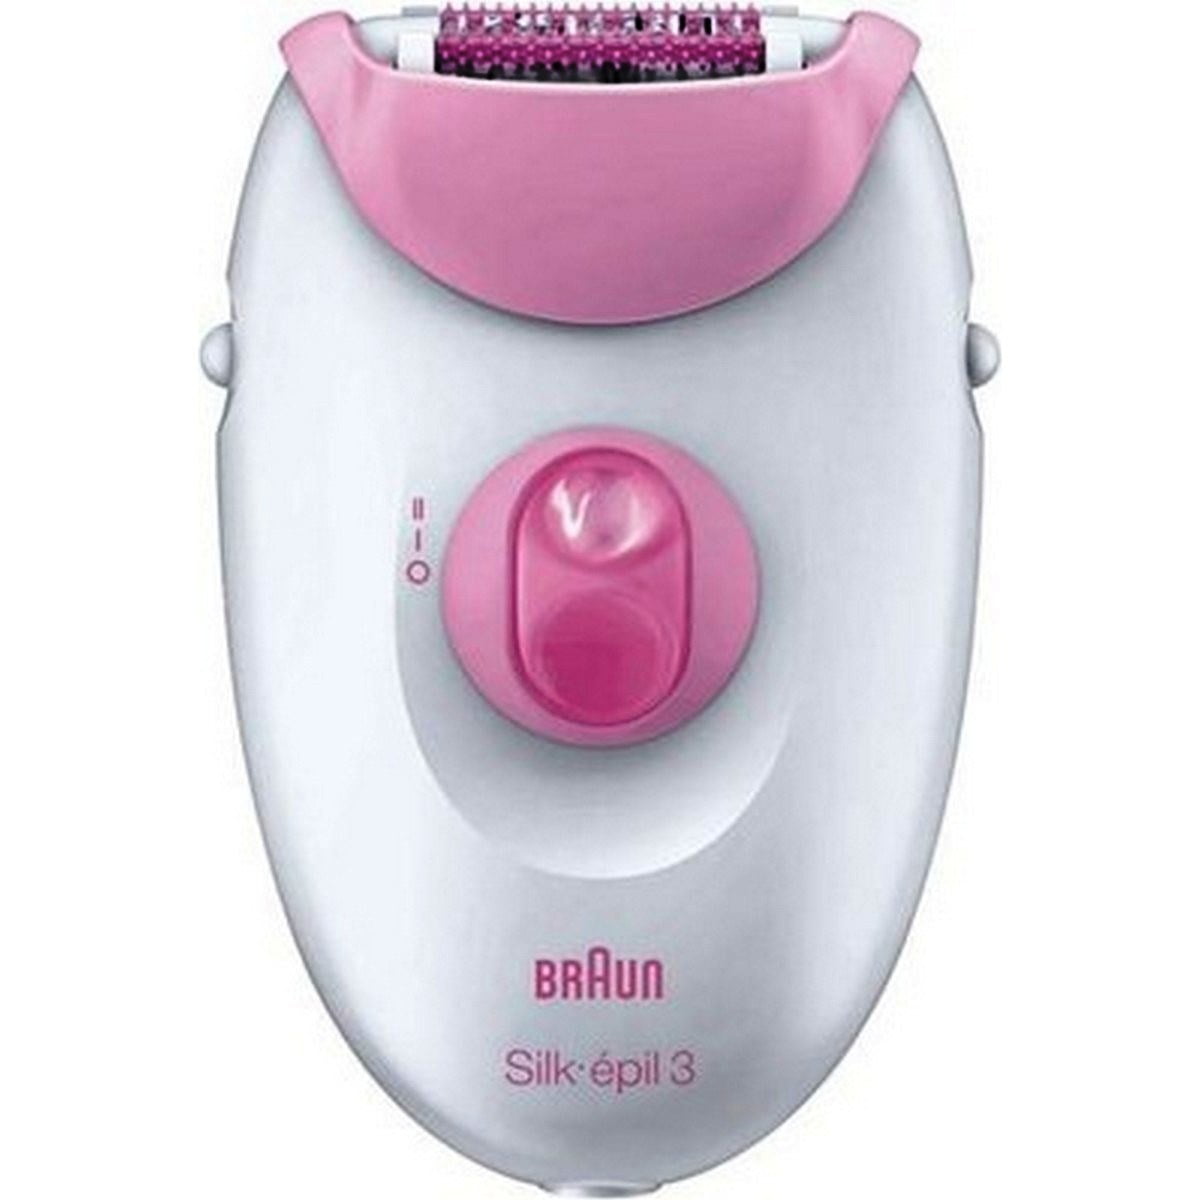 Braun SE3270 Epilator For Women Review and Specifications